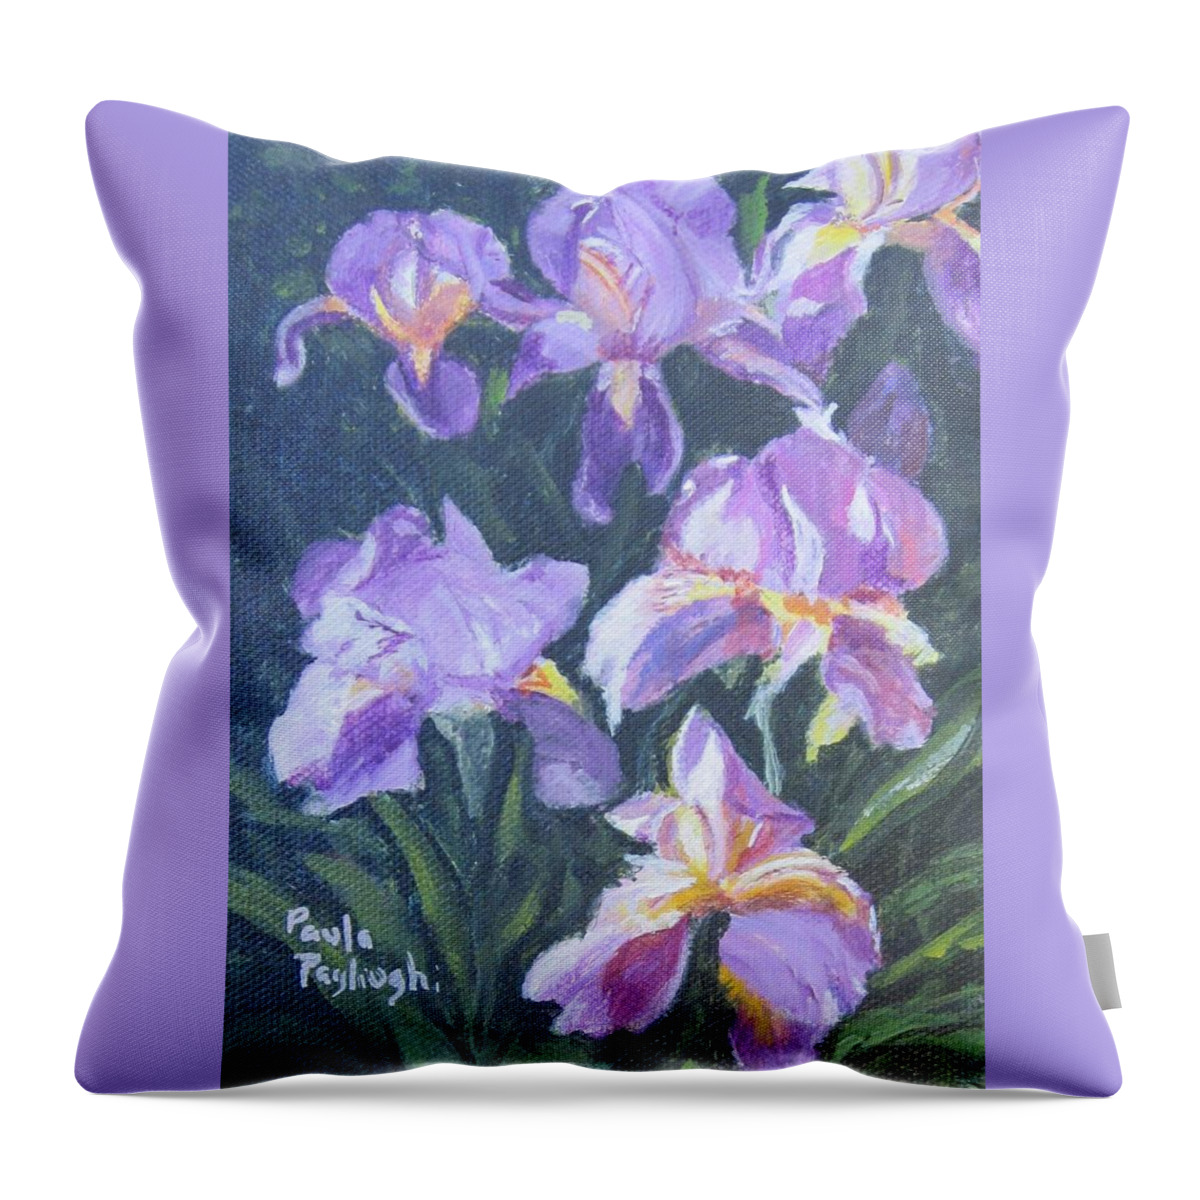 Painting Throw Pillow featuring the painting Purple Iris by Paula Pagliughi